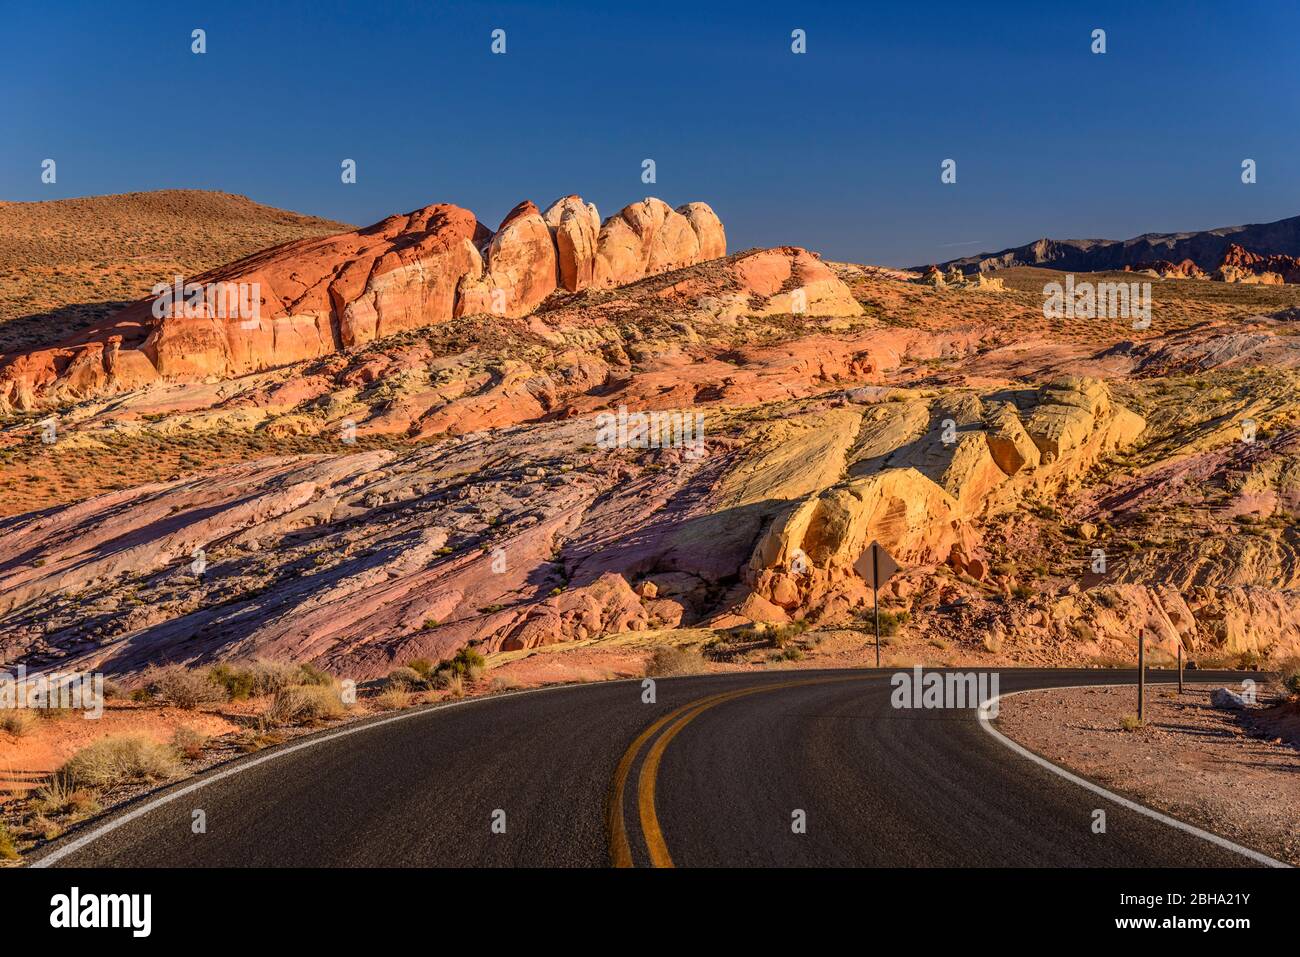 USA, Nevada, Clark County, Overton, Valley of Fire State Park, White Domes Scenic Byway, Pink Canyon Stock Photo